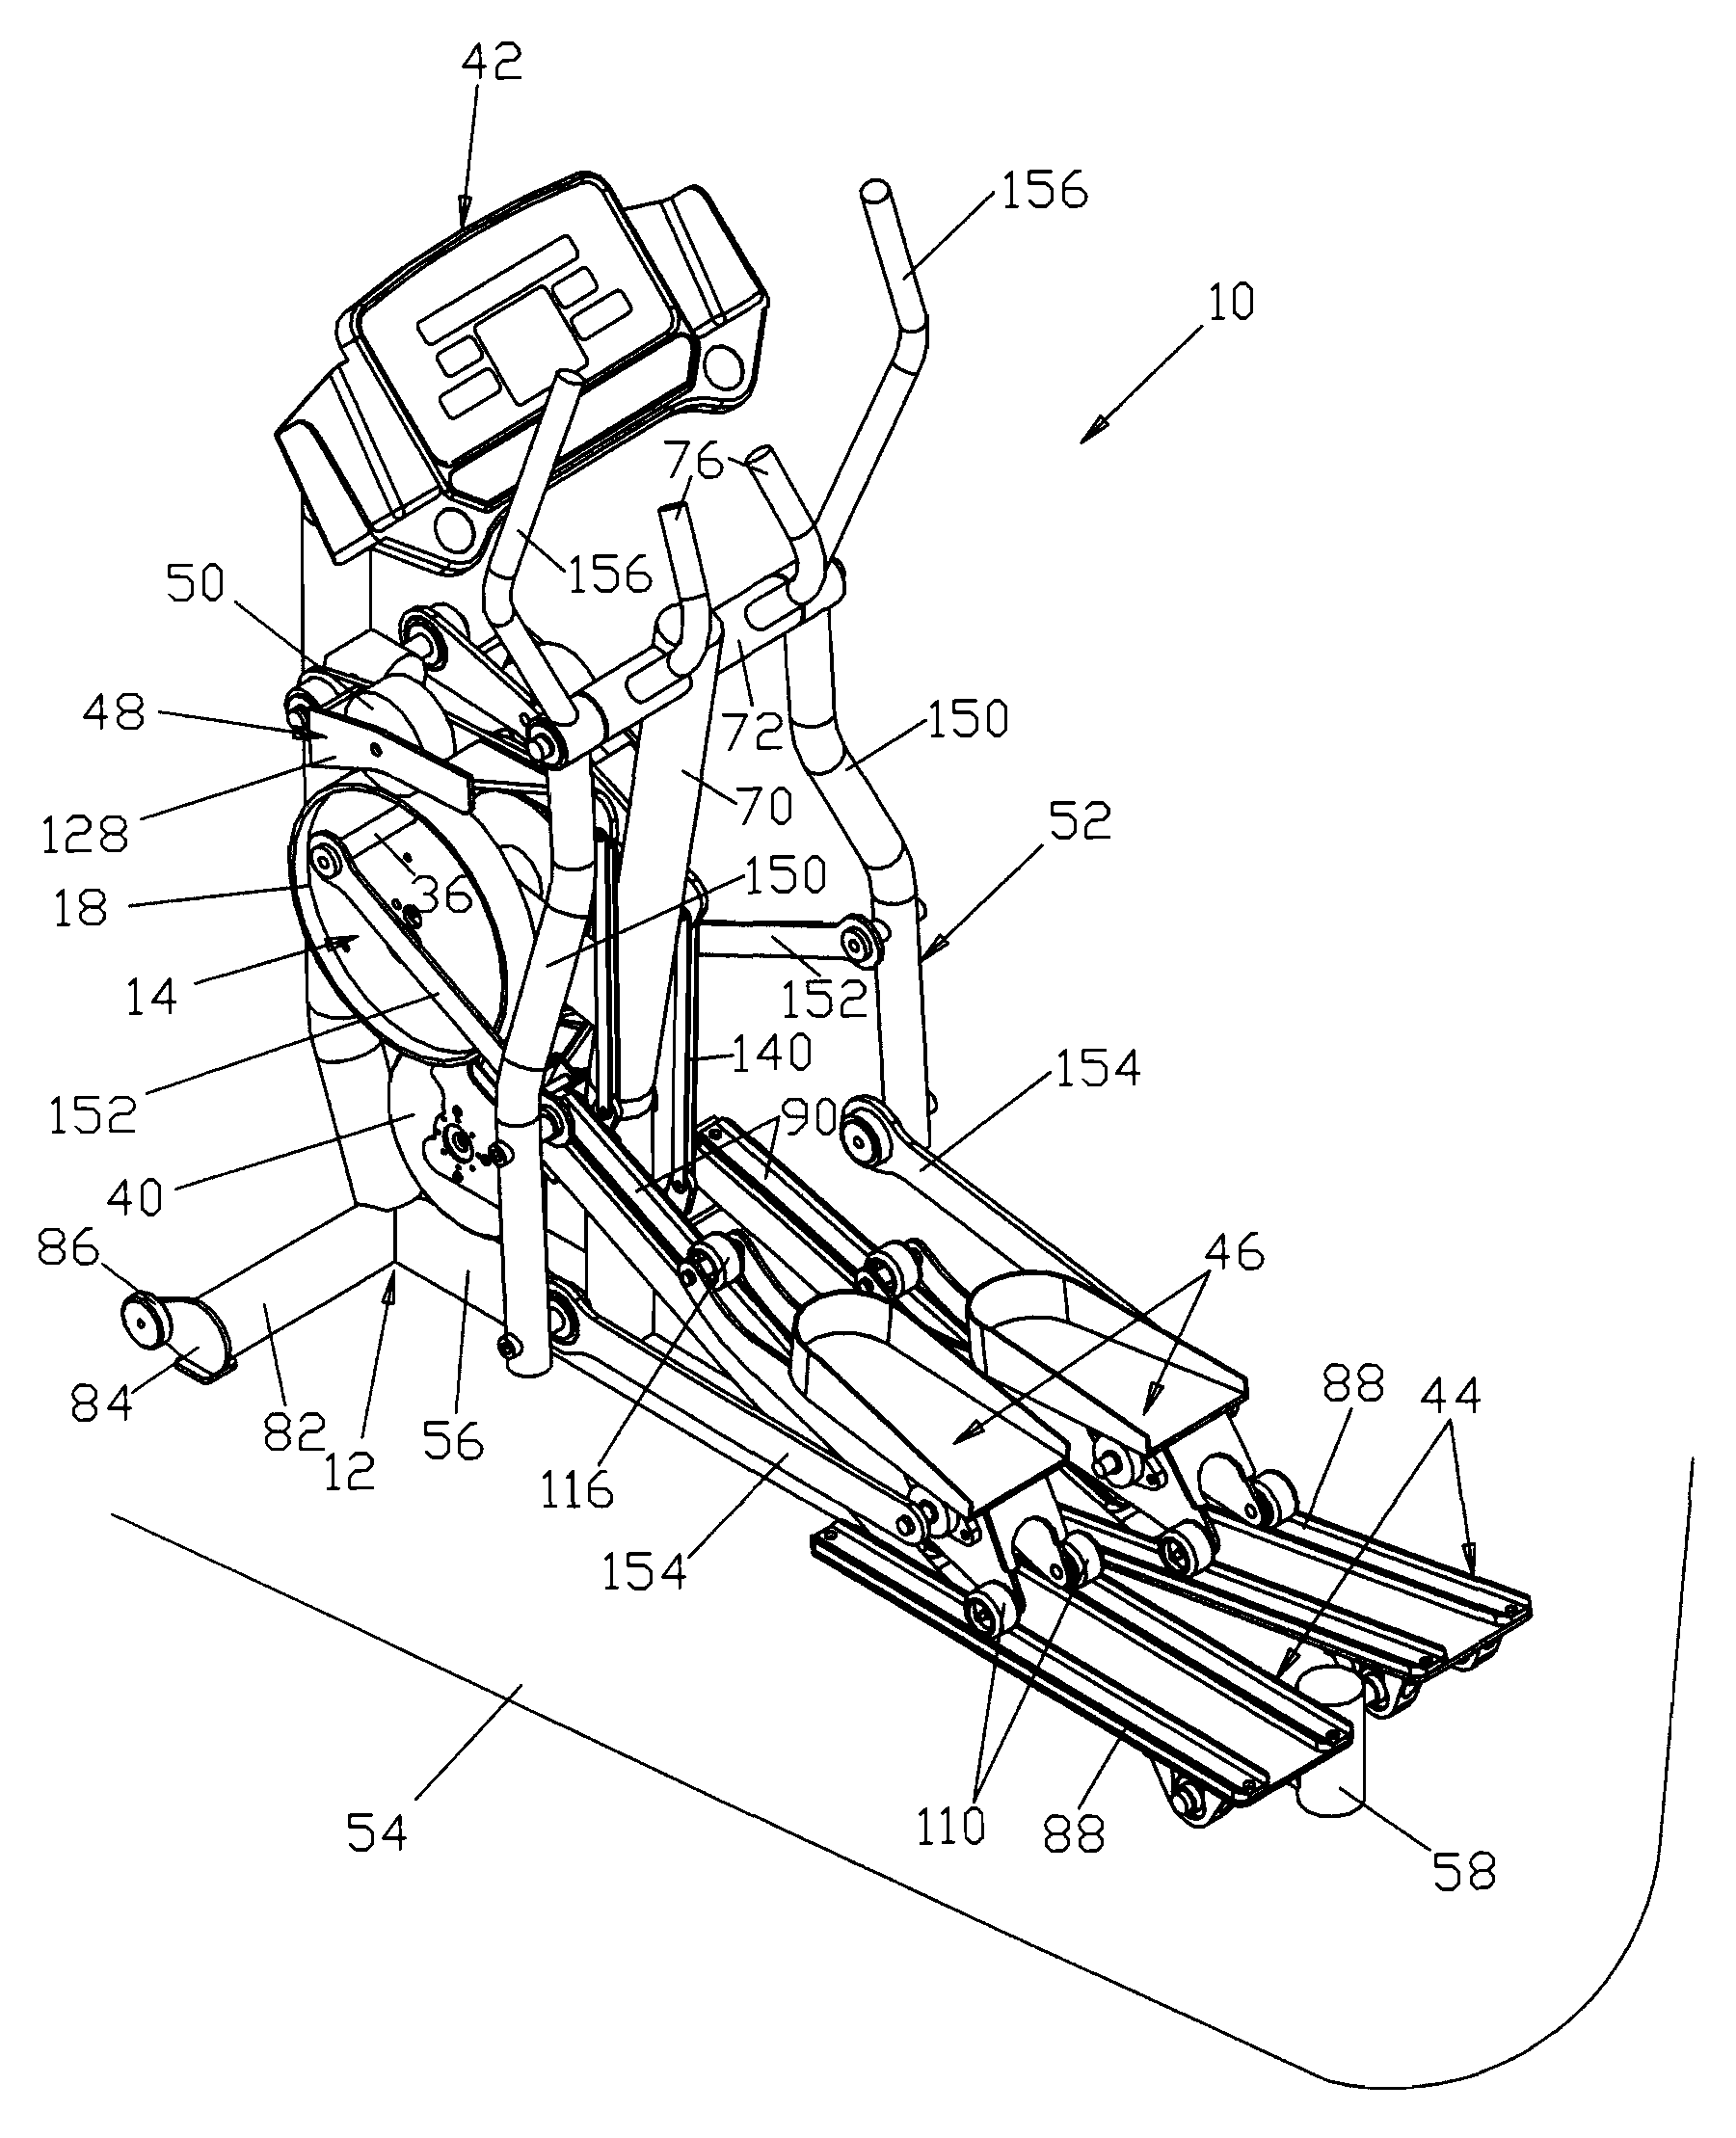 Walking/jogging exercise machine with articulated cam follower arrangement